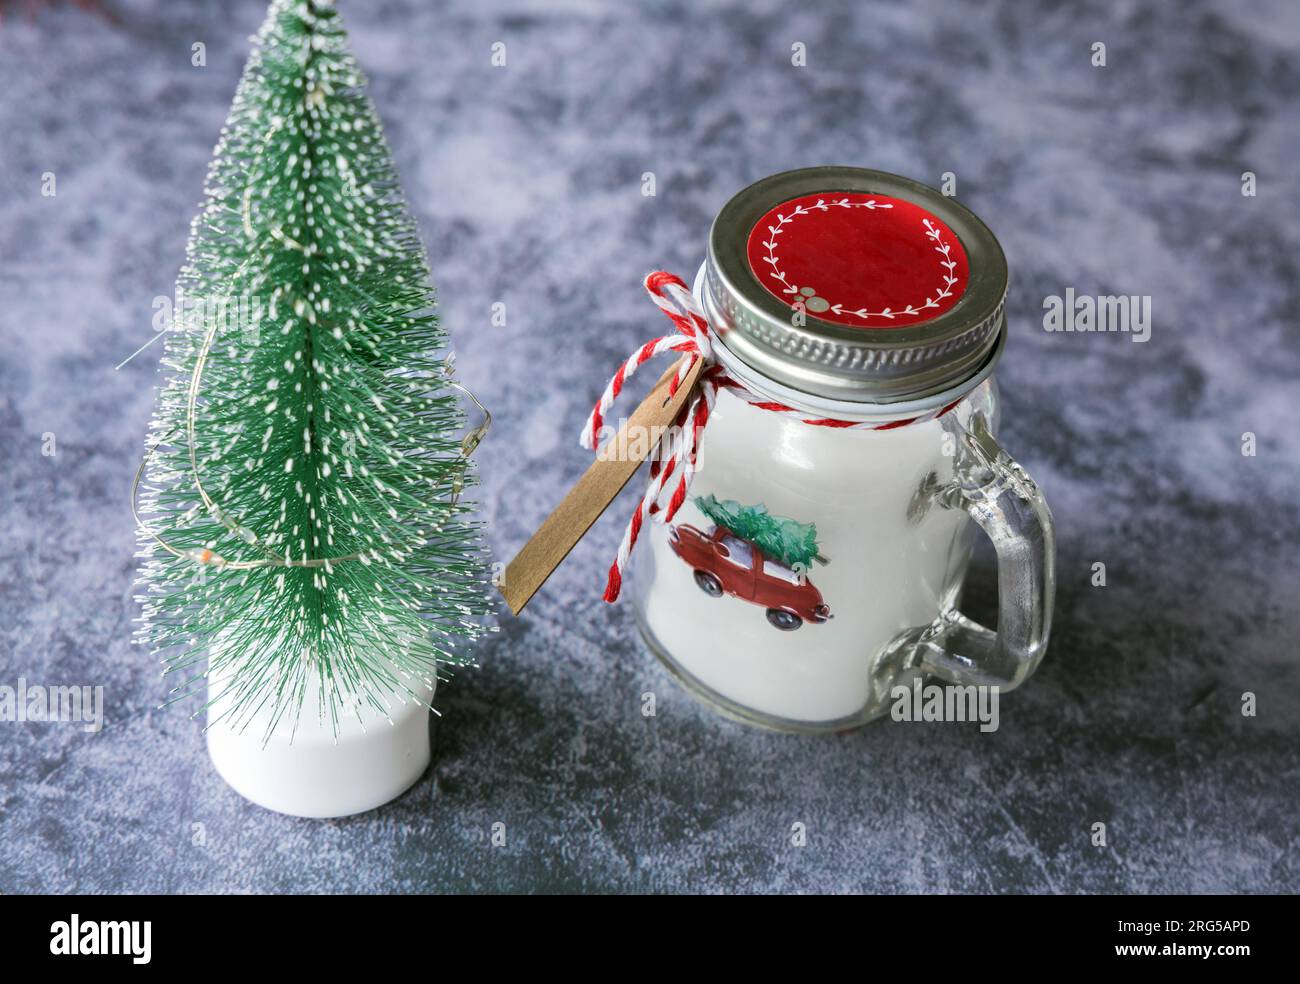 Christmas candles of white paraffin in a glass, decorated with a car and a Christmas tree on a gray background. Stock Photo